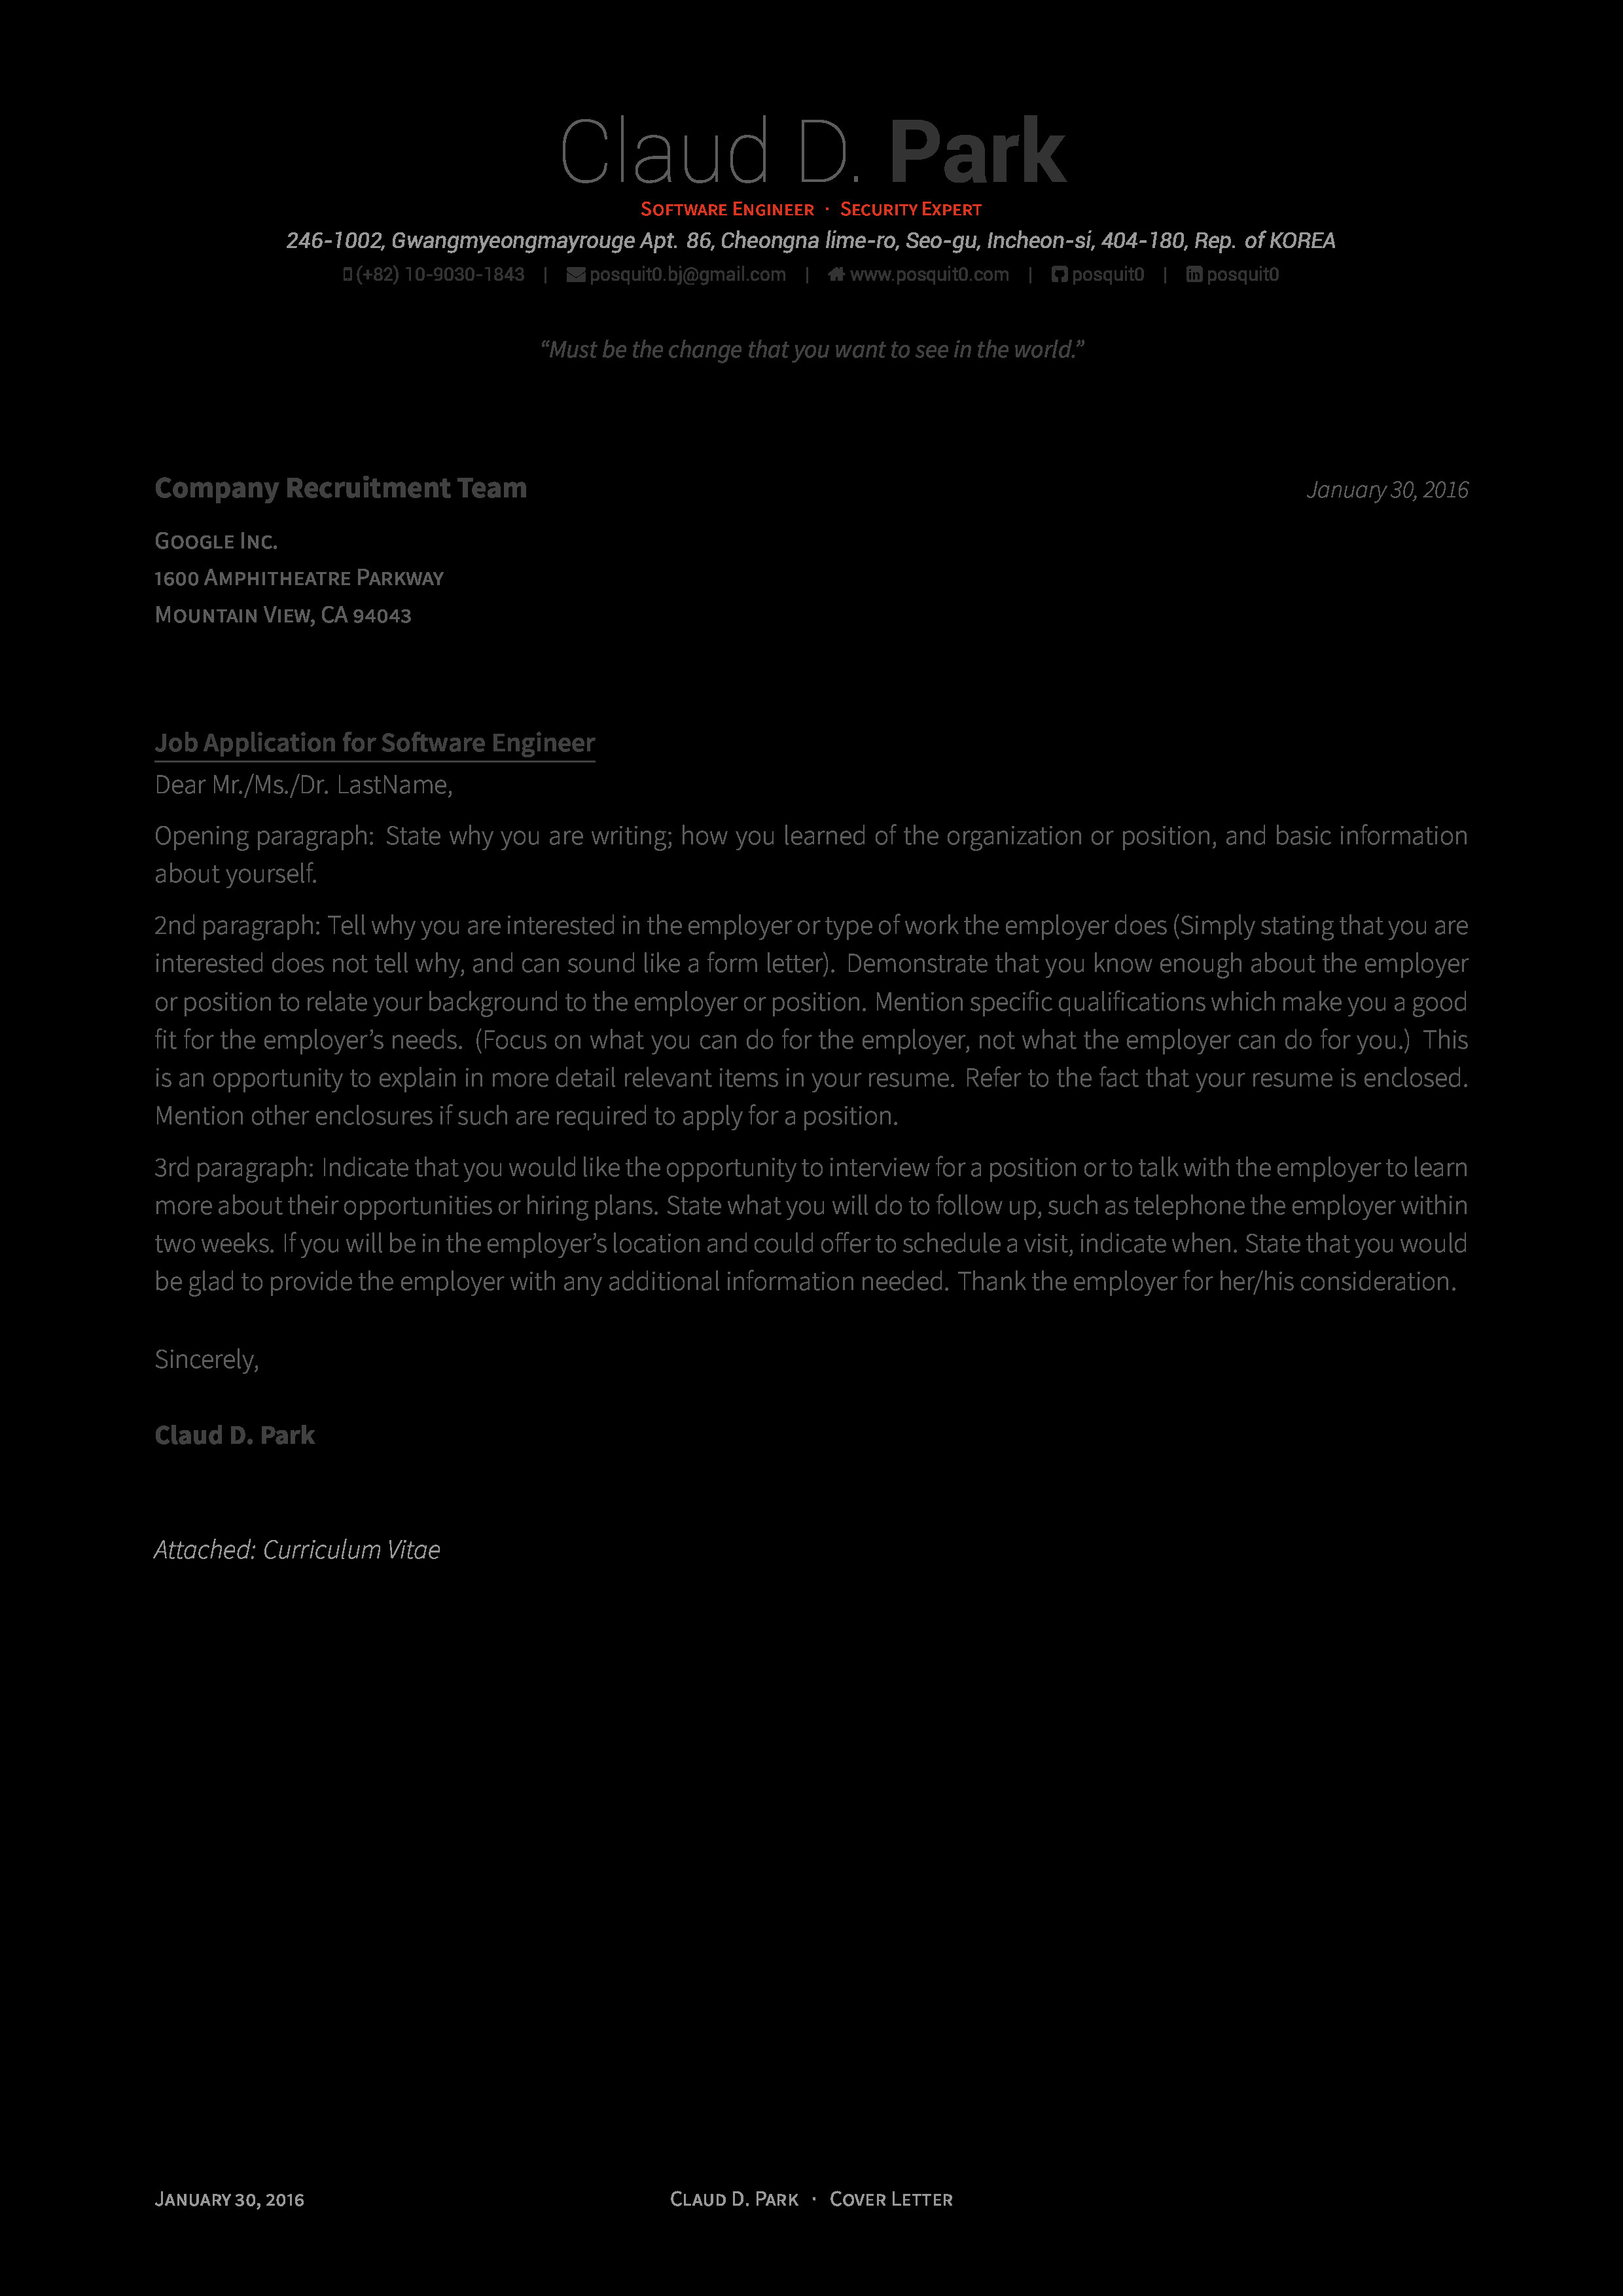 Latex Cover Letter Templates Github Posquit0 Awesome Cv Awesome Cv is Latex Template